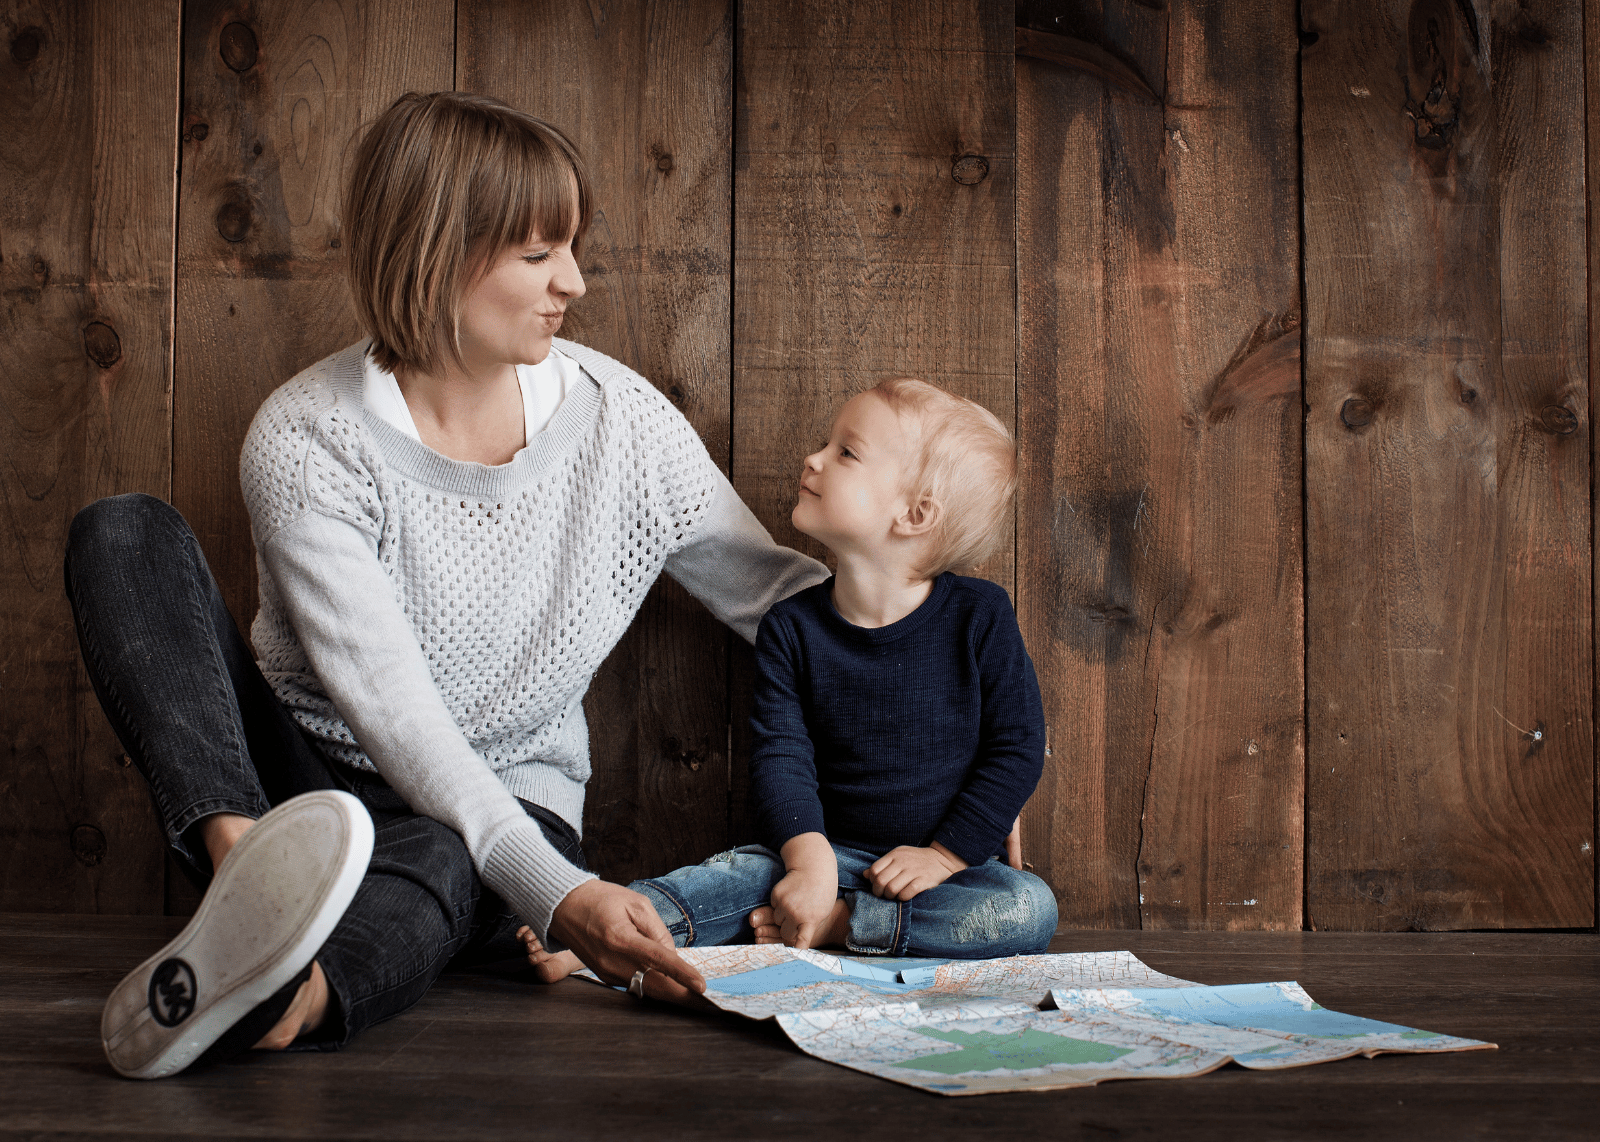 A Mother's Tale: Unwrapping Trust and Responsibility in Our Daily Treats